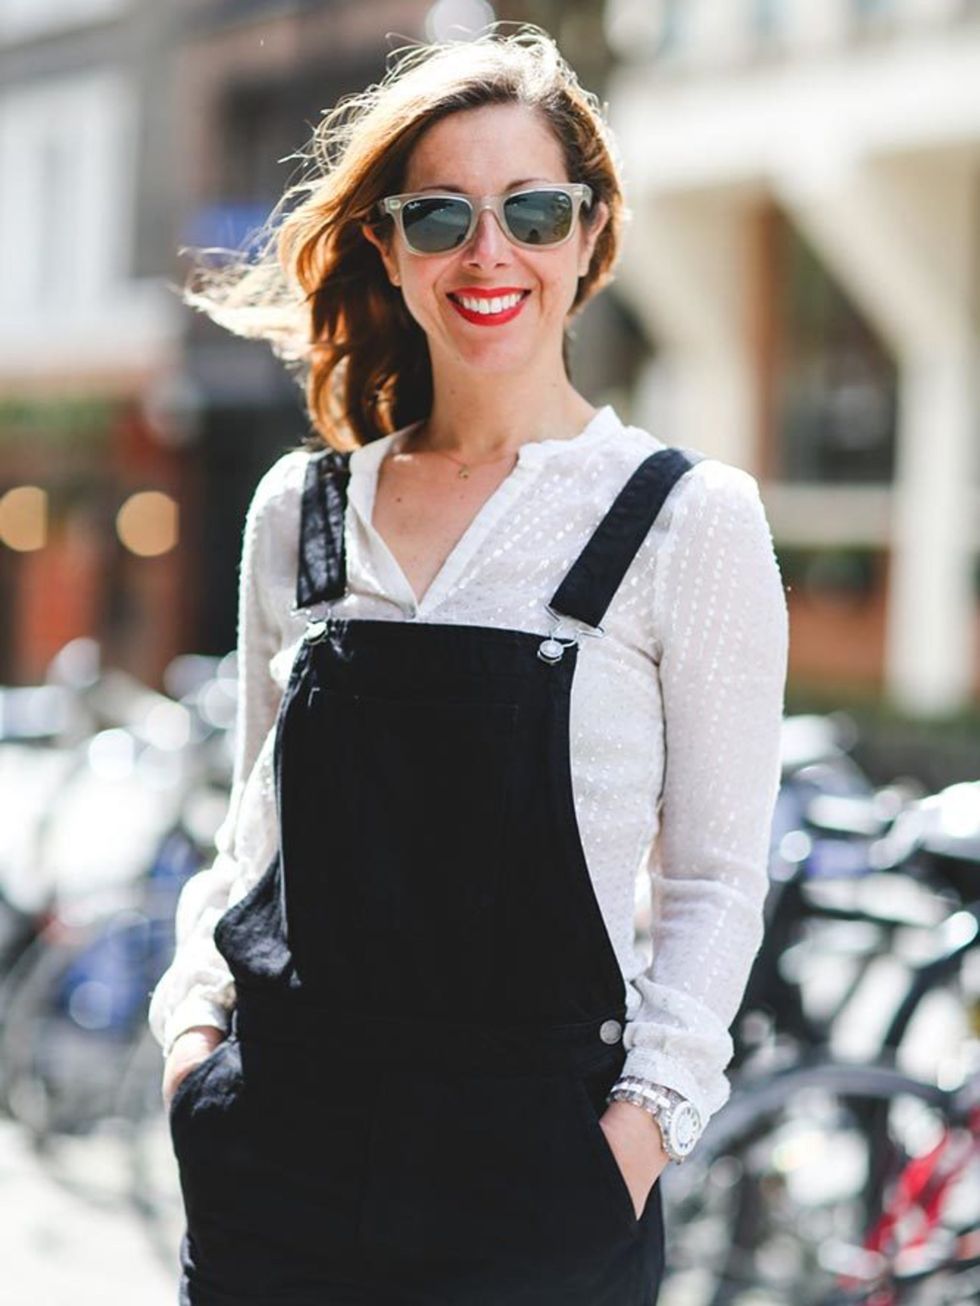 <p>Kirsty Dale, Executive Fashion & Beauty Director</p>

<p>Zara blouse, Gap dungarees, Russell & Bromley shoes, Topshop socks, Ray Ban sunglasses</p>